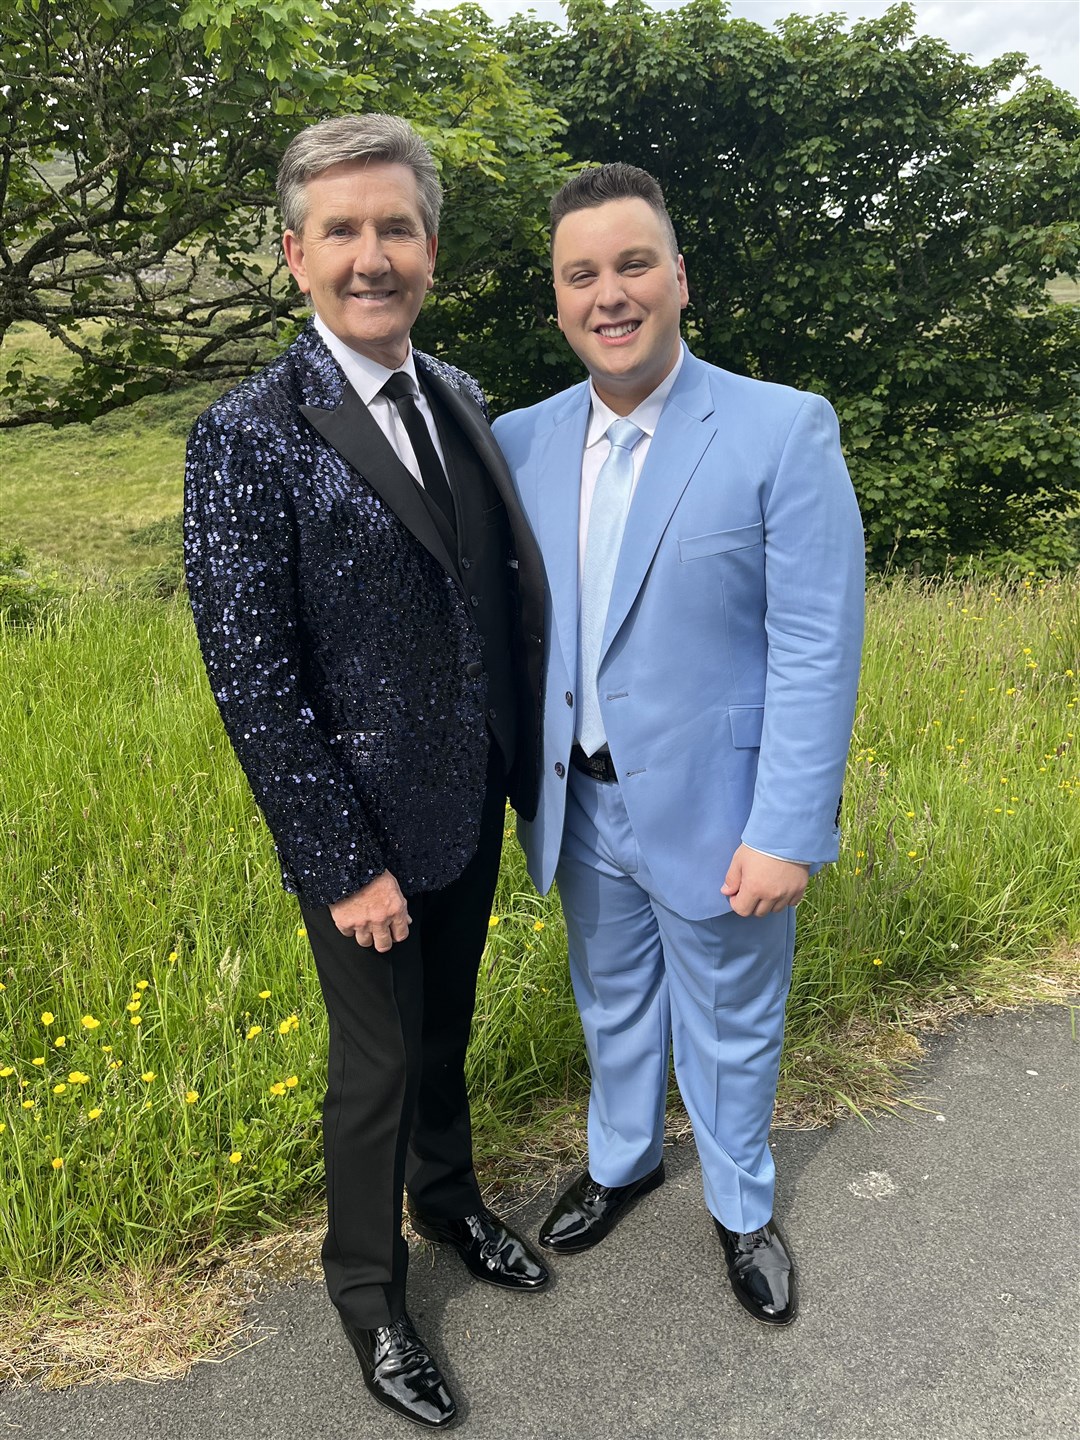 Brandon says he has looked up to Daniel O'Donnell since the age of 10.